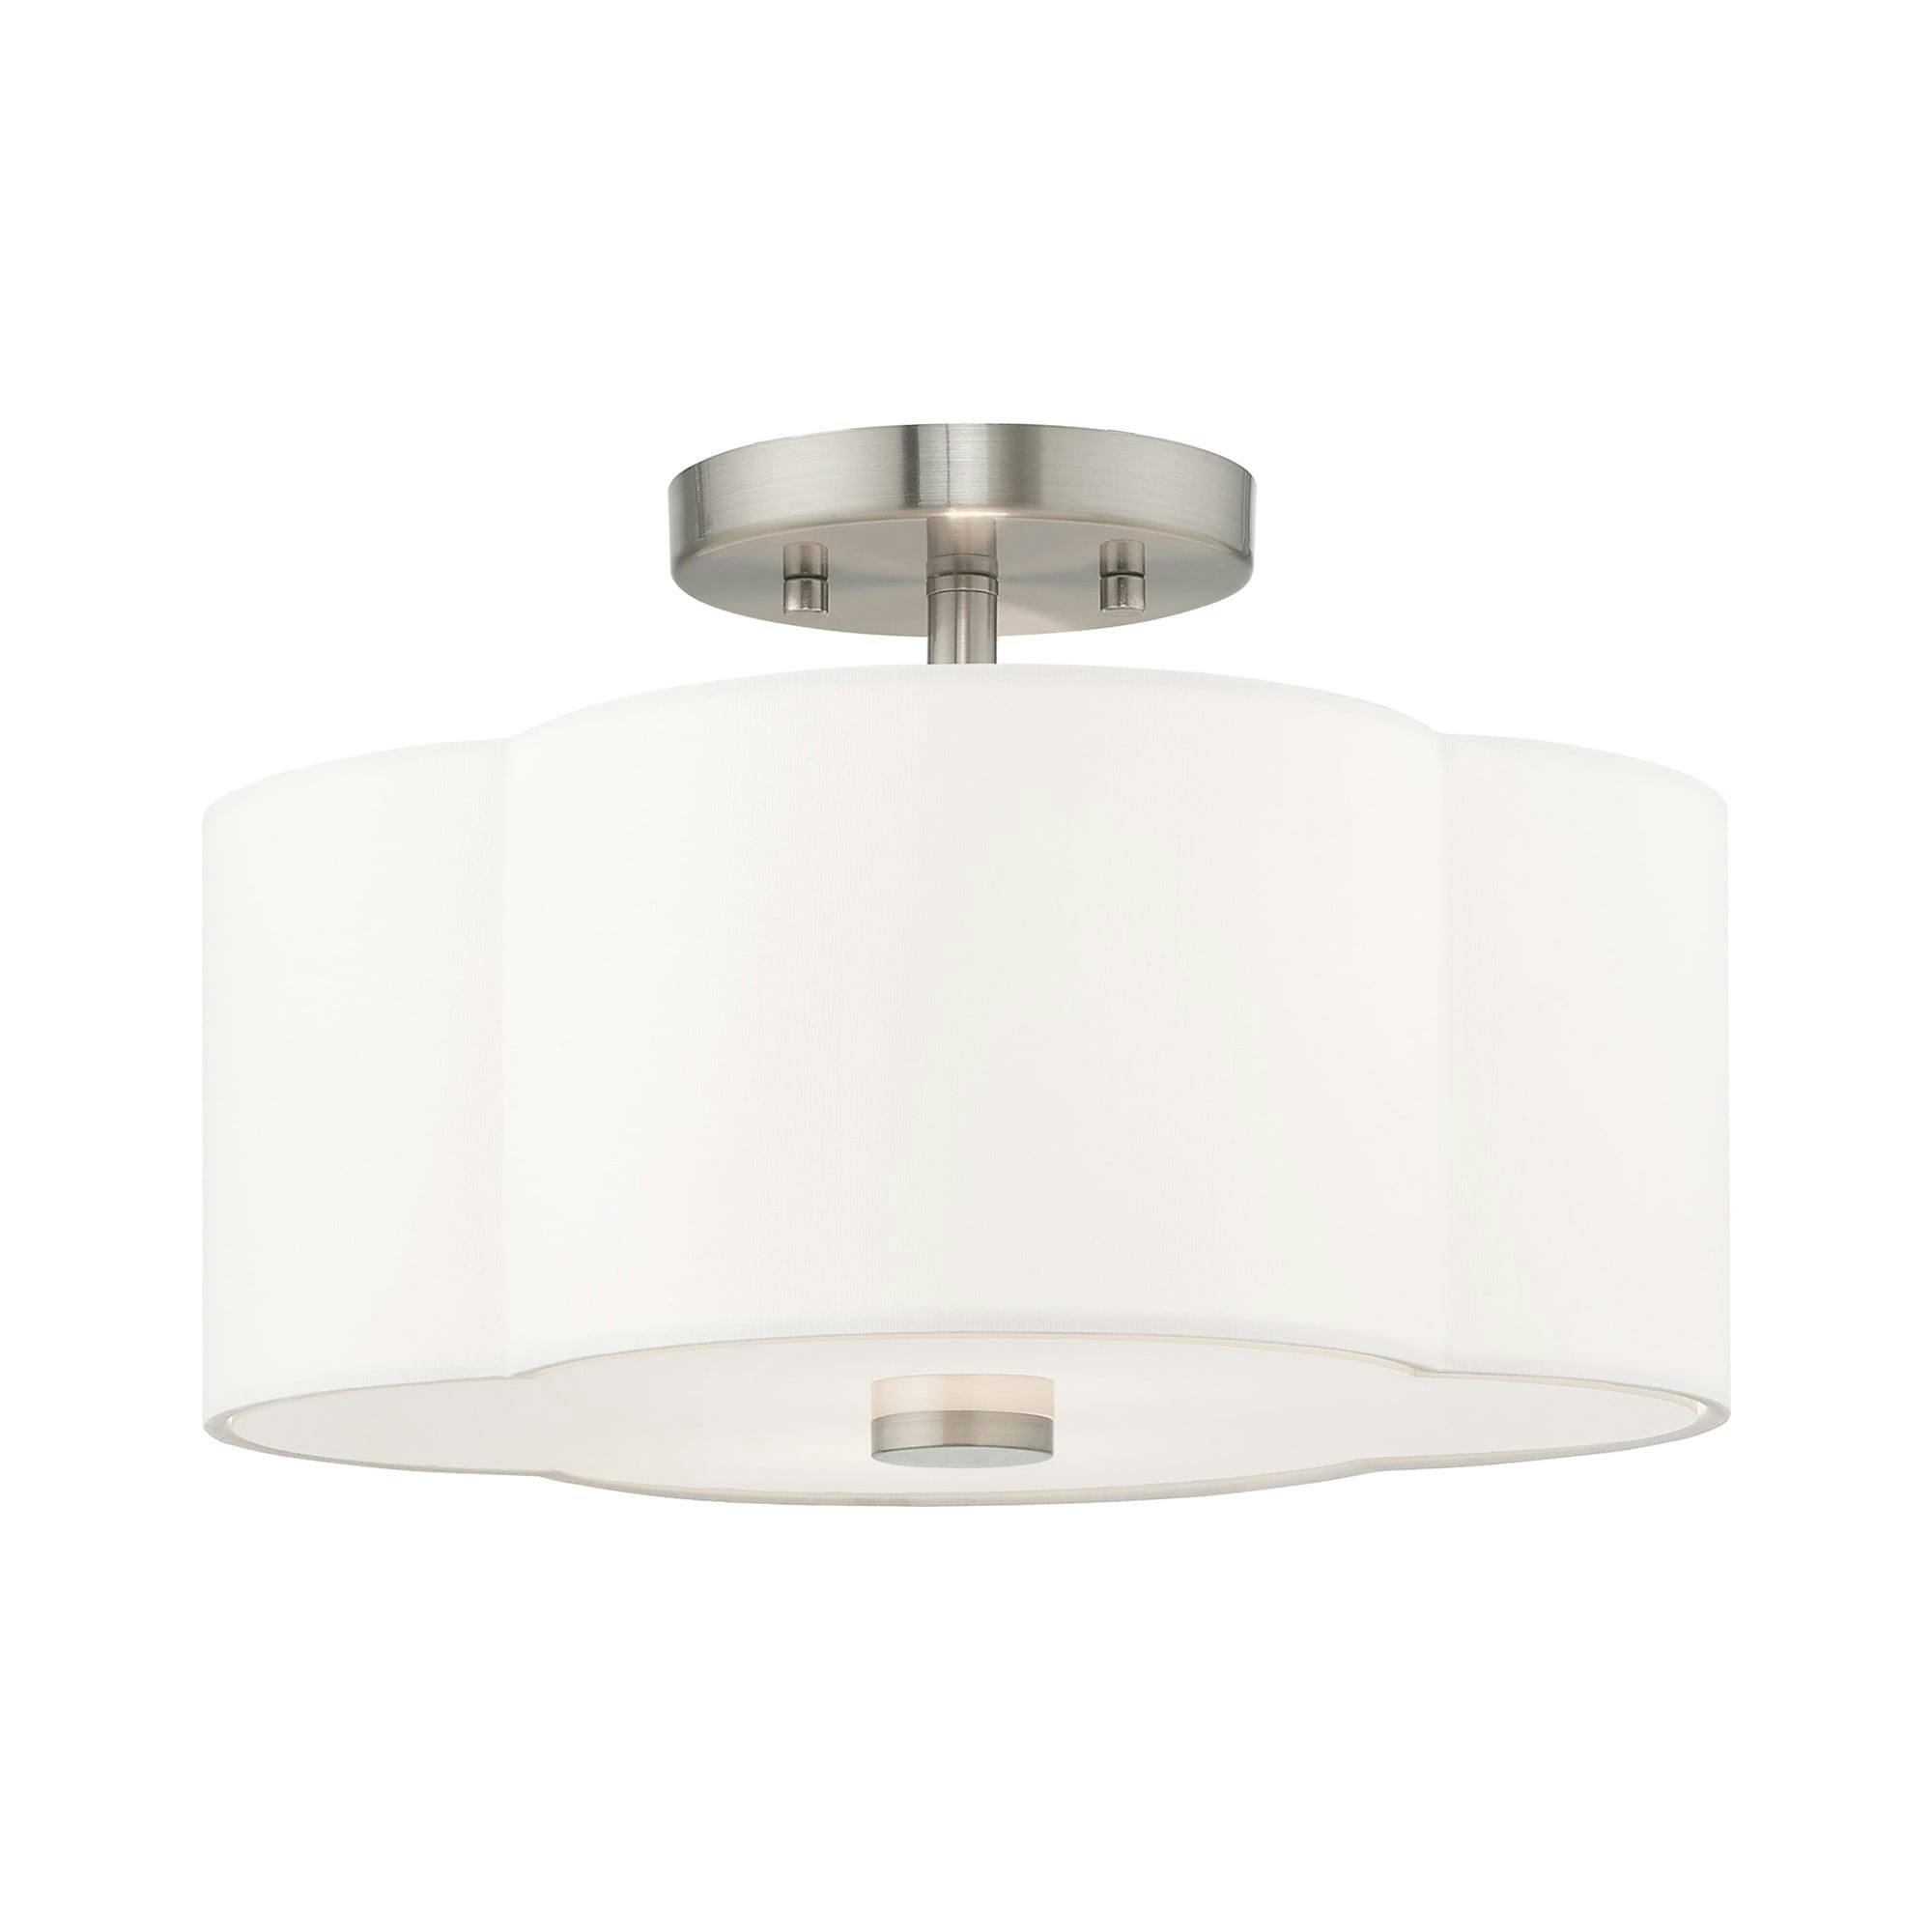 Chelsea Brushed Nickel 2-Light Indoor/Outdoor Flush Mount with Off-White Shade